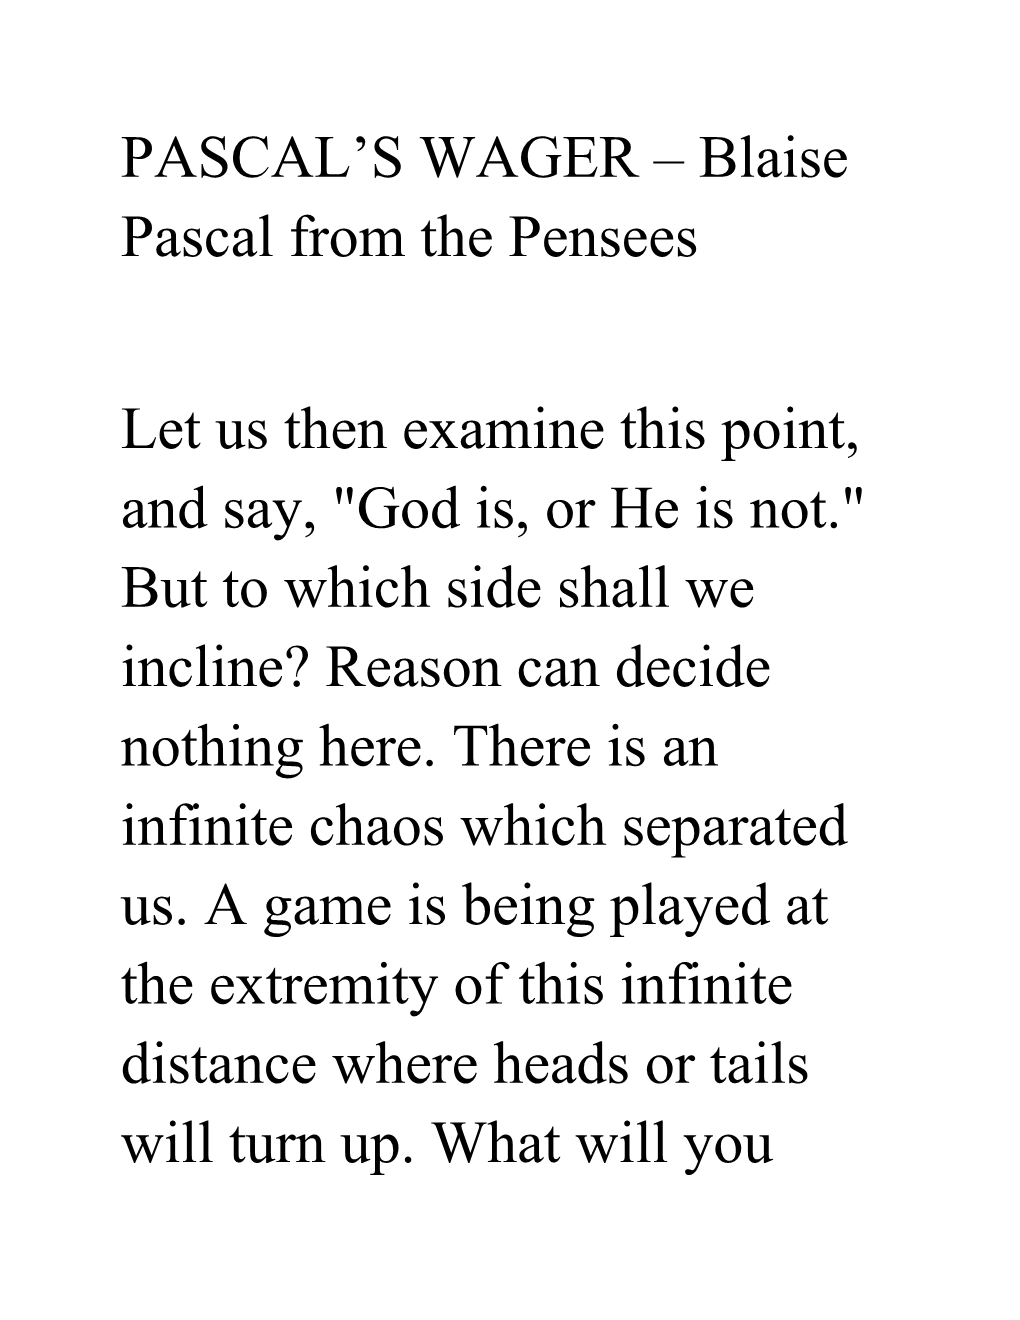 PASCAL S WAGER Blaise Pascal from the Pensees